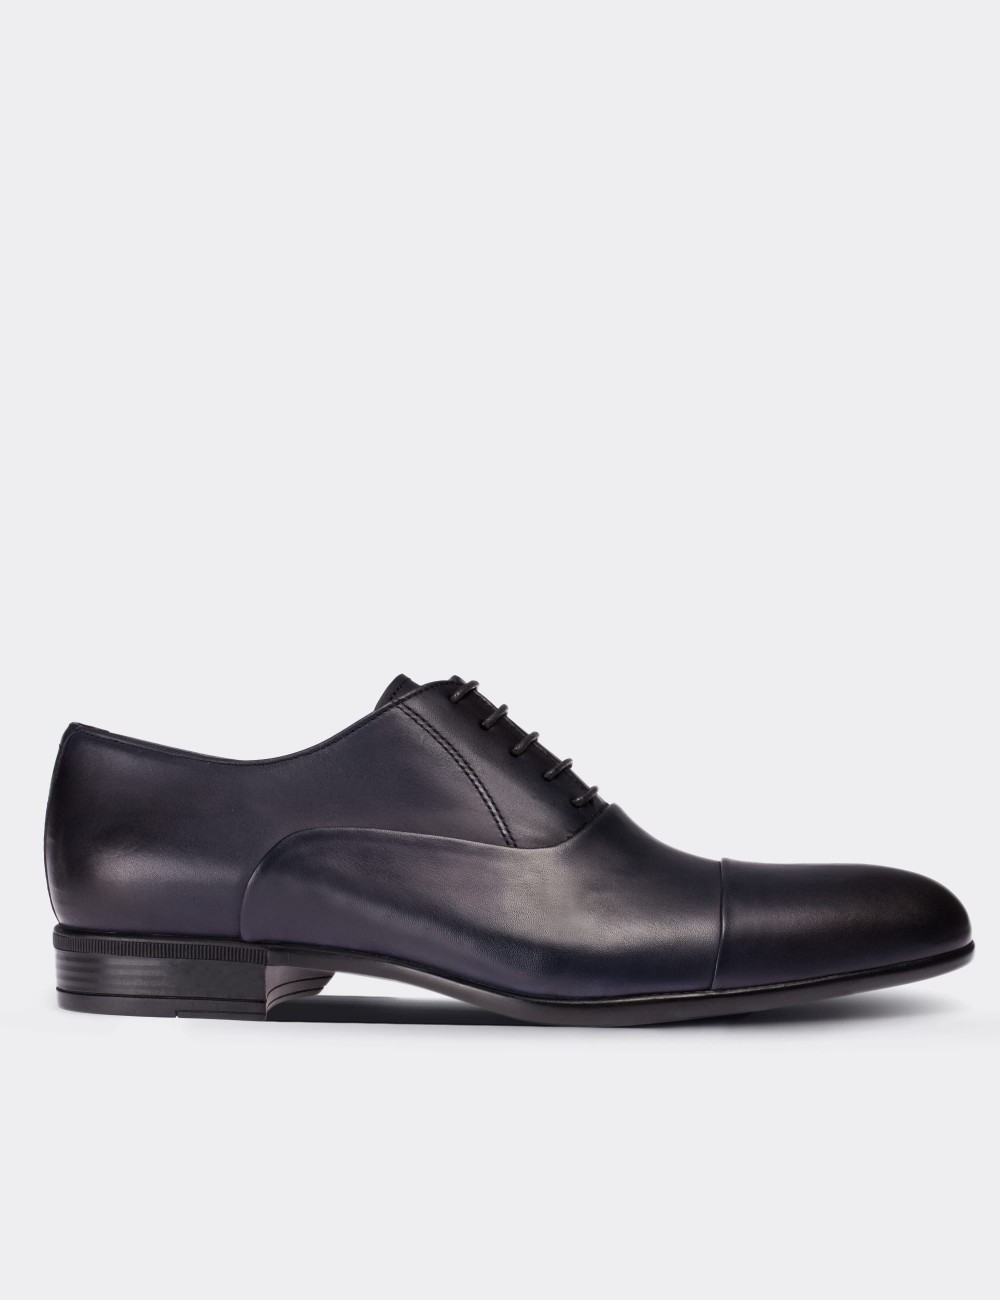 Navy  Leather Classic Shoes - 01590MLCVC01